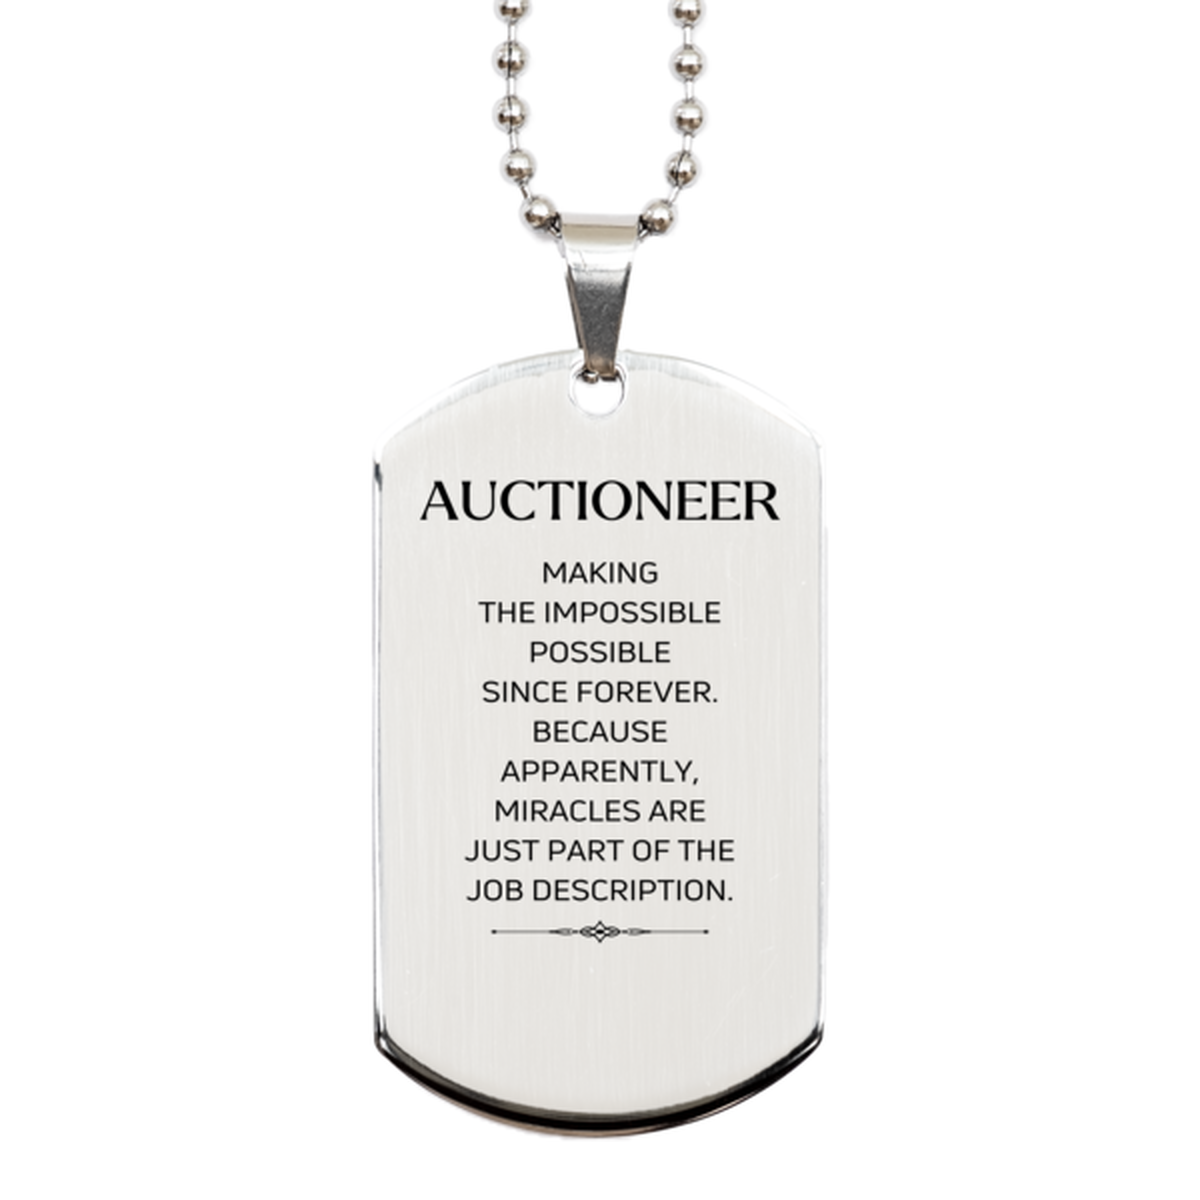 Funny Auctioneer Gifts, Miracles are just part of the job description, Inspirational Birthday Silver Dog Tag For Auctioneer, Men, Women, Coworkers, Friends, Boss